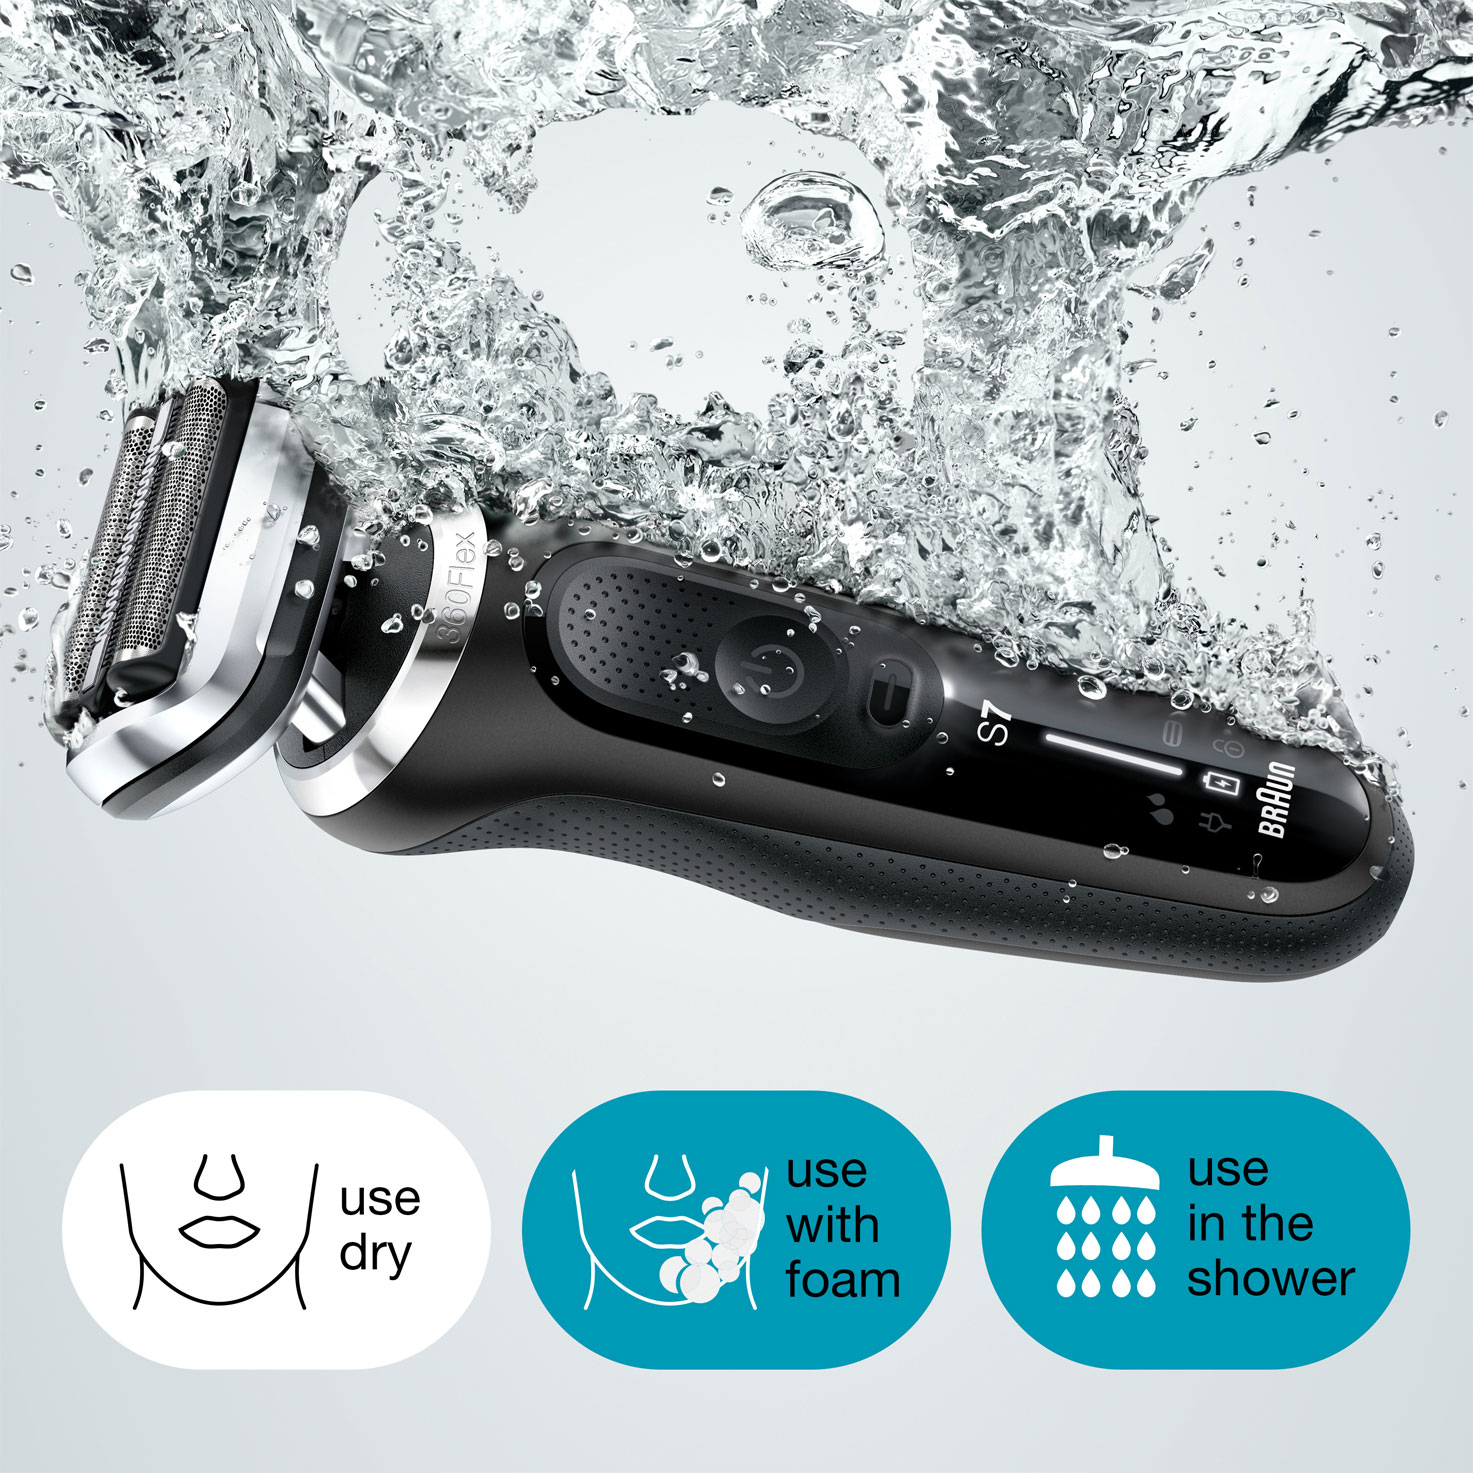 Series 7 71-N1000s Wet & Dry case, travel with shaver